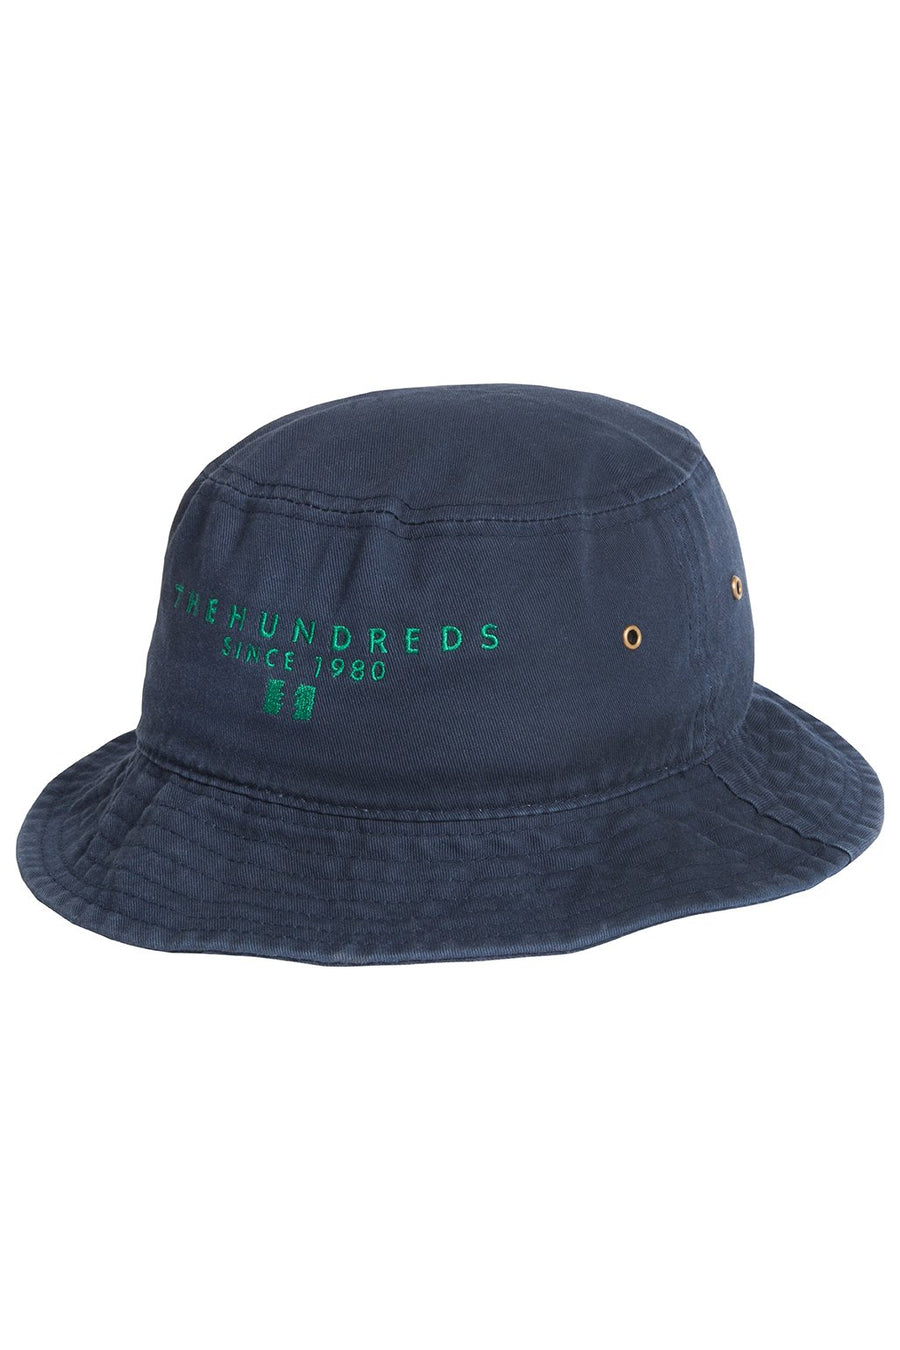 The Hundreds : Over Bucket Hat (Navy)